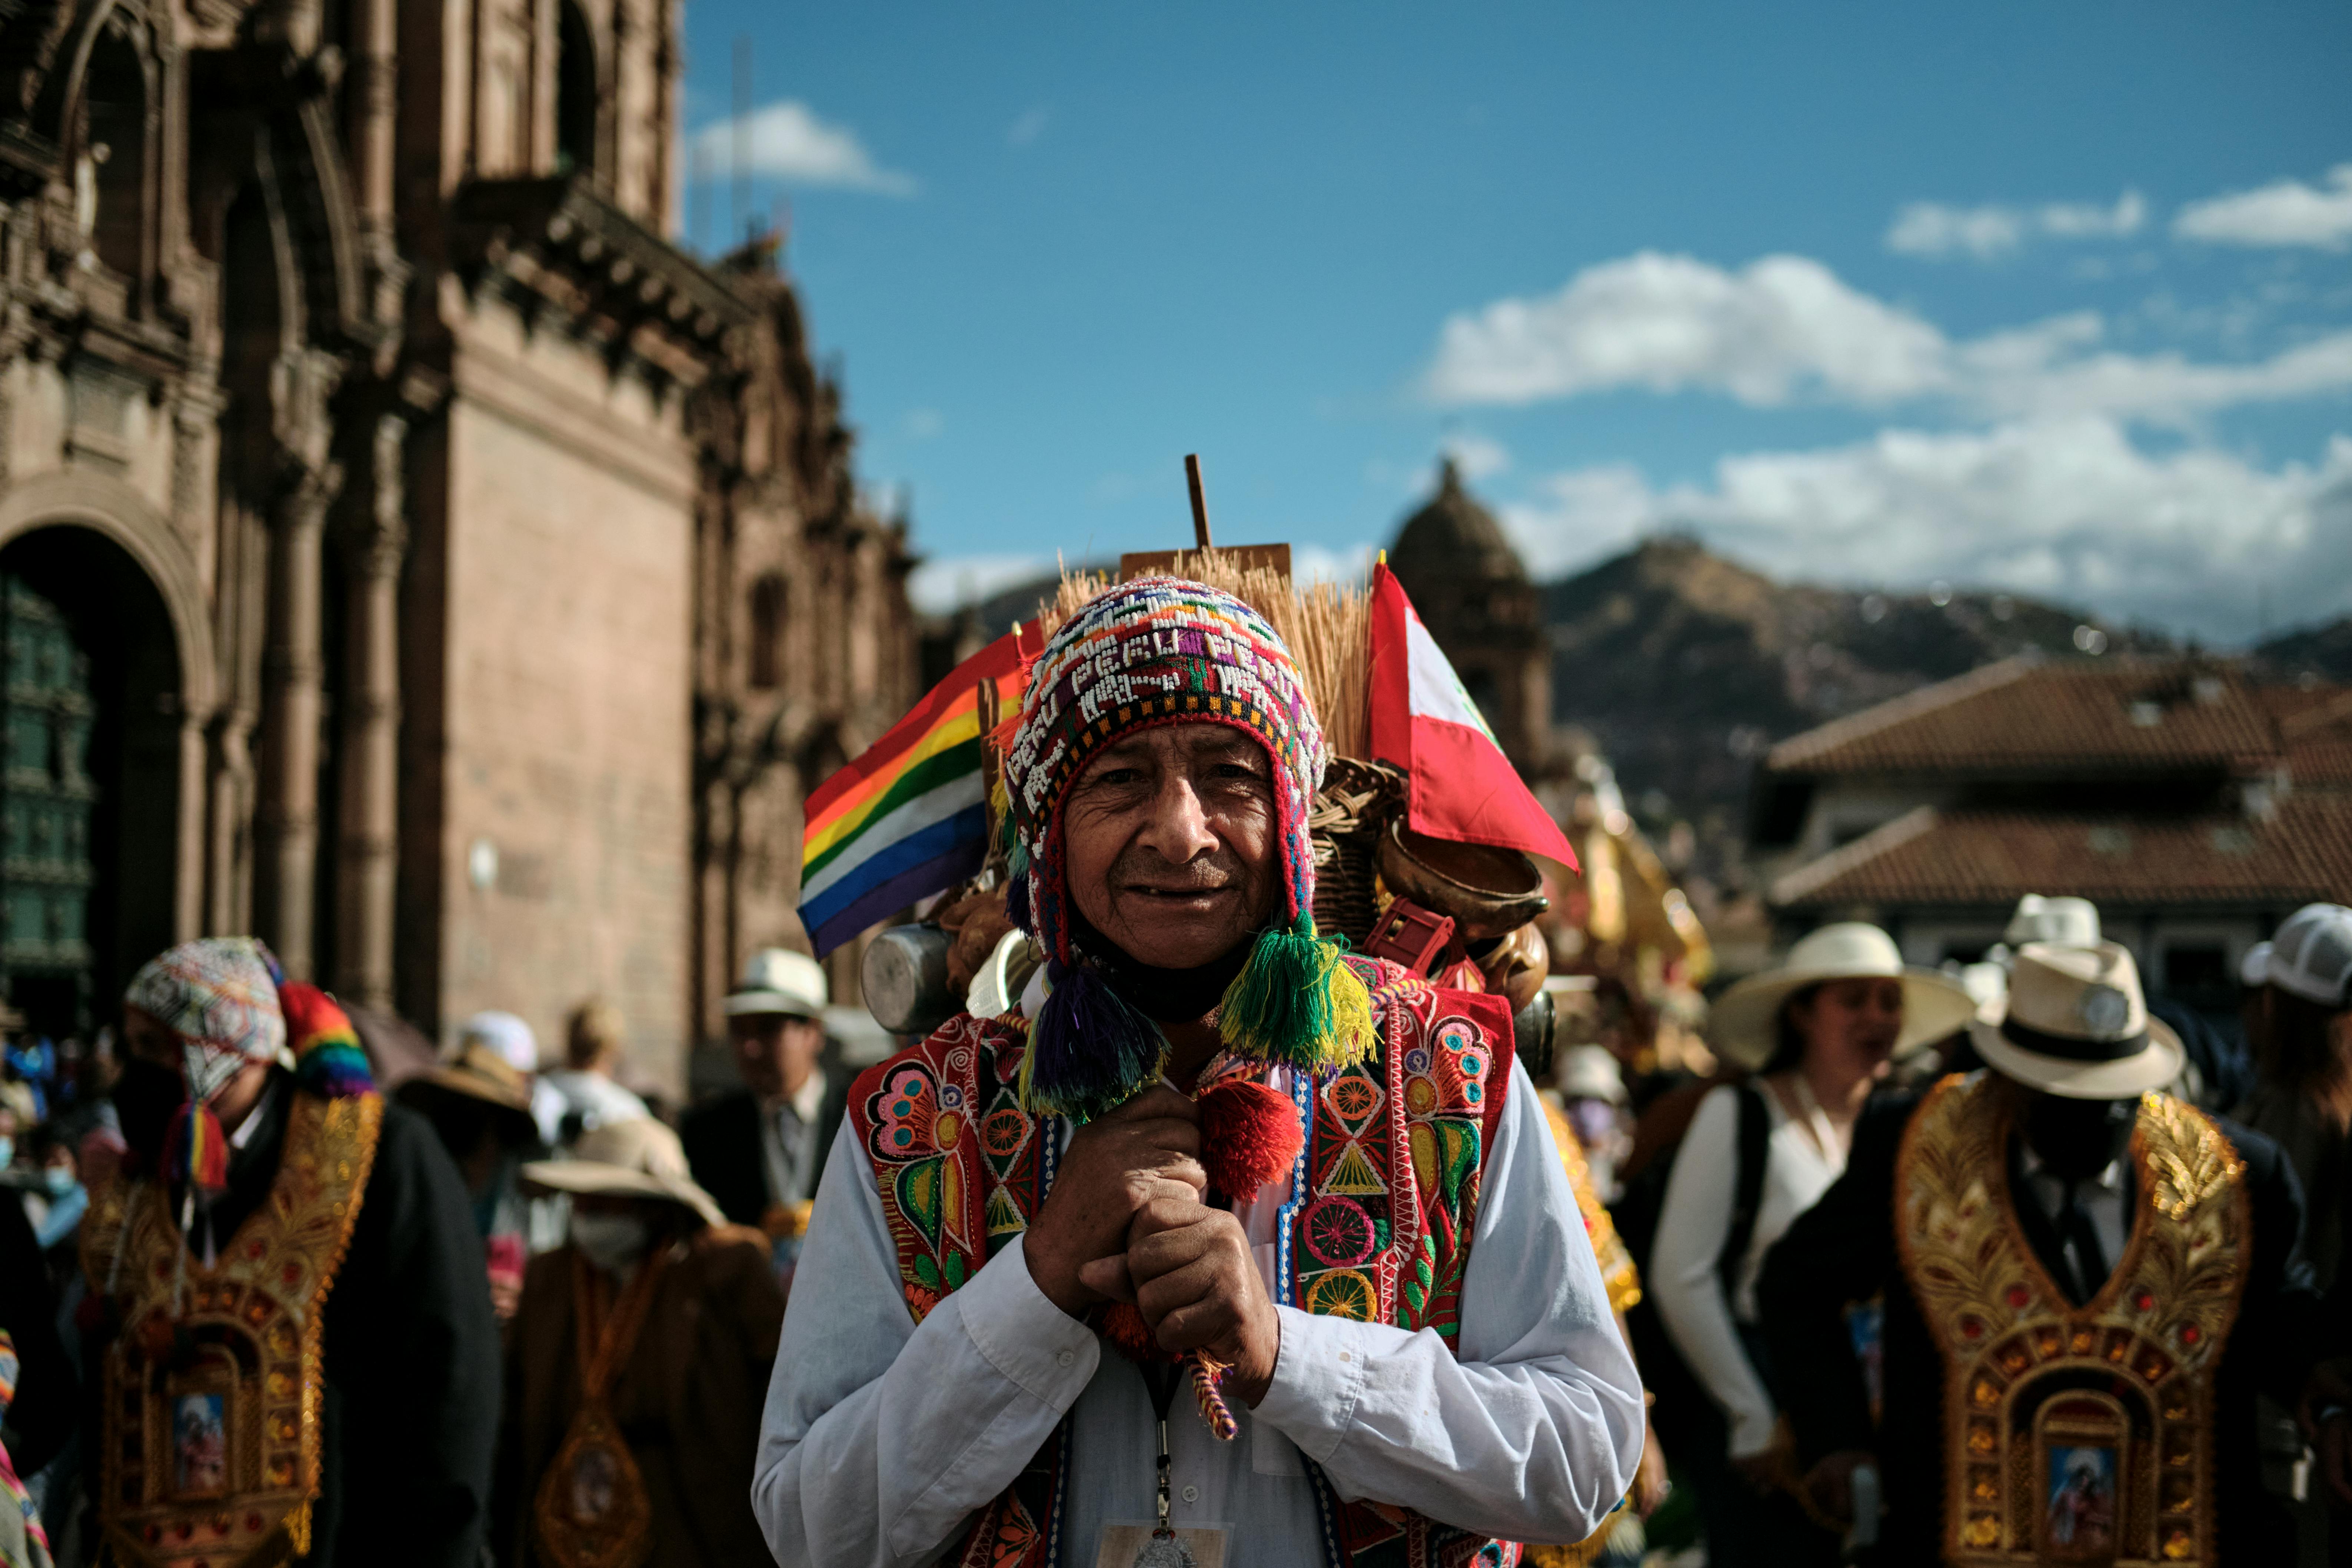 A man in Andean indigenous dress stands in the road